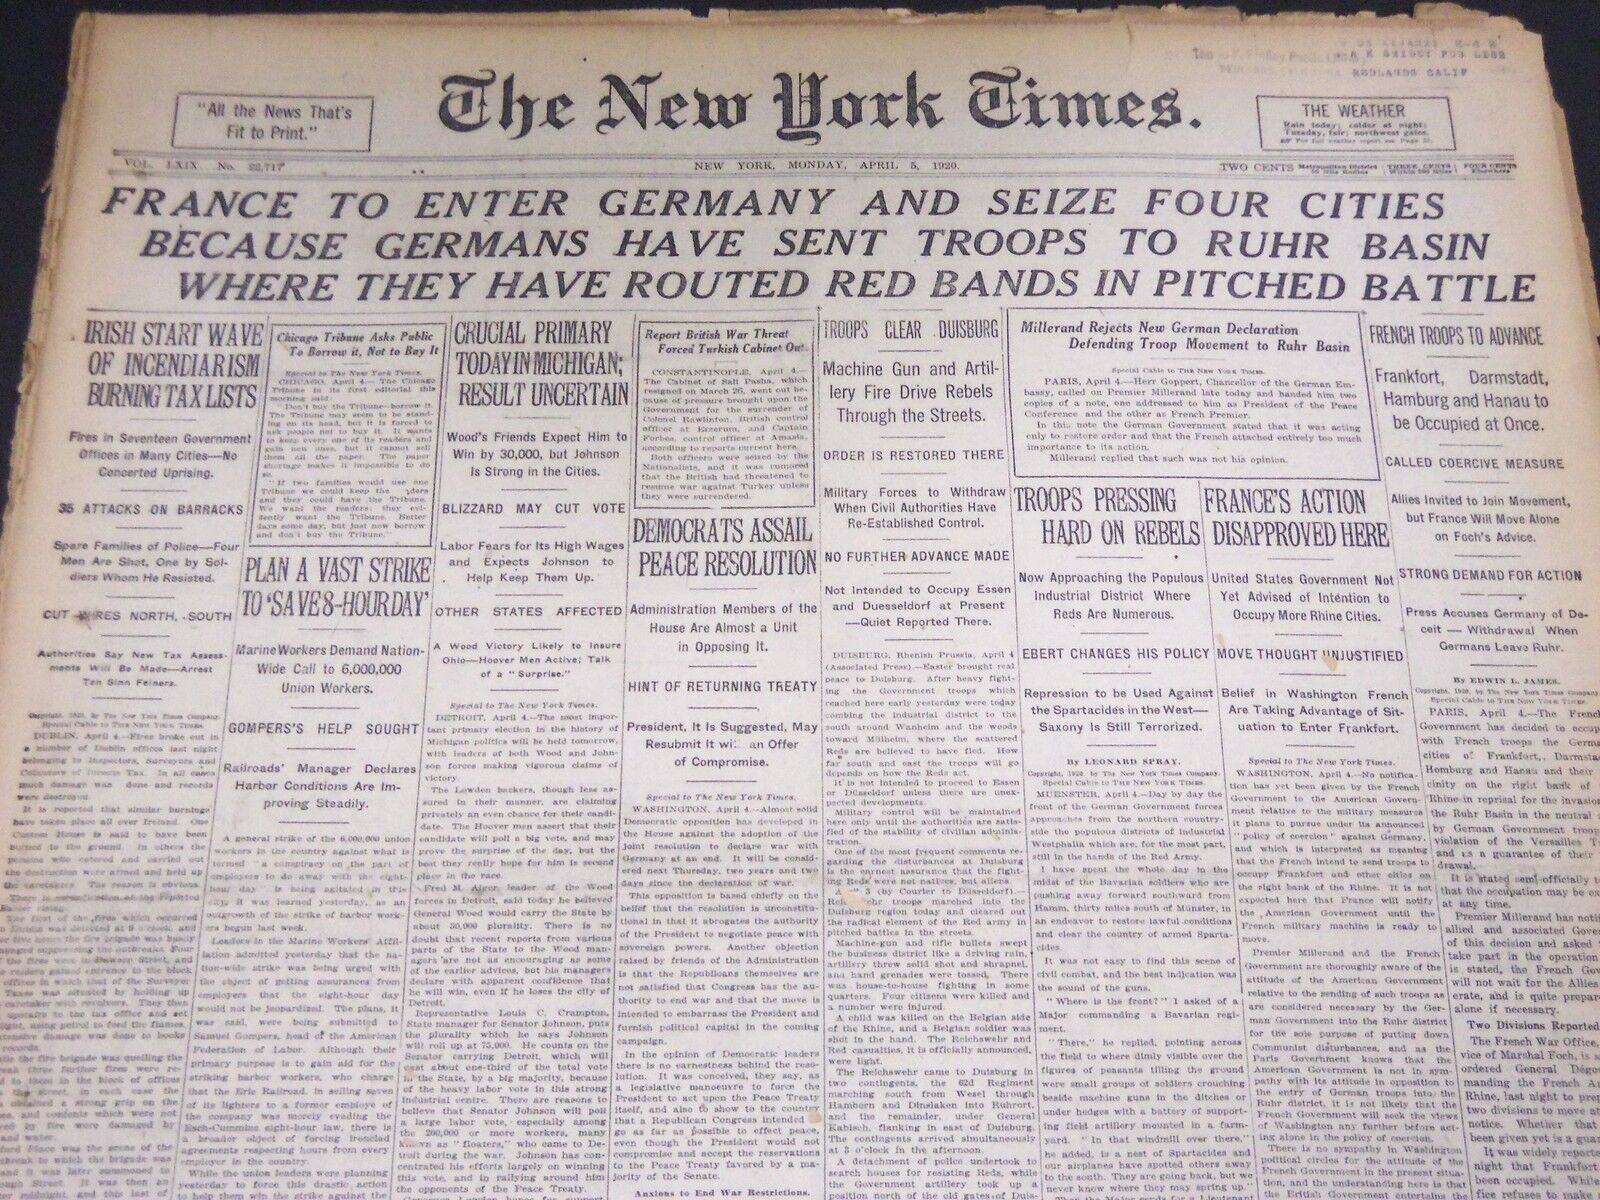 1920 APRIL 5 NEW YORK TIMES - FRANCE SEIZES 4 GERMAN CITIES - NT 5038